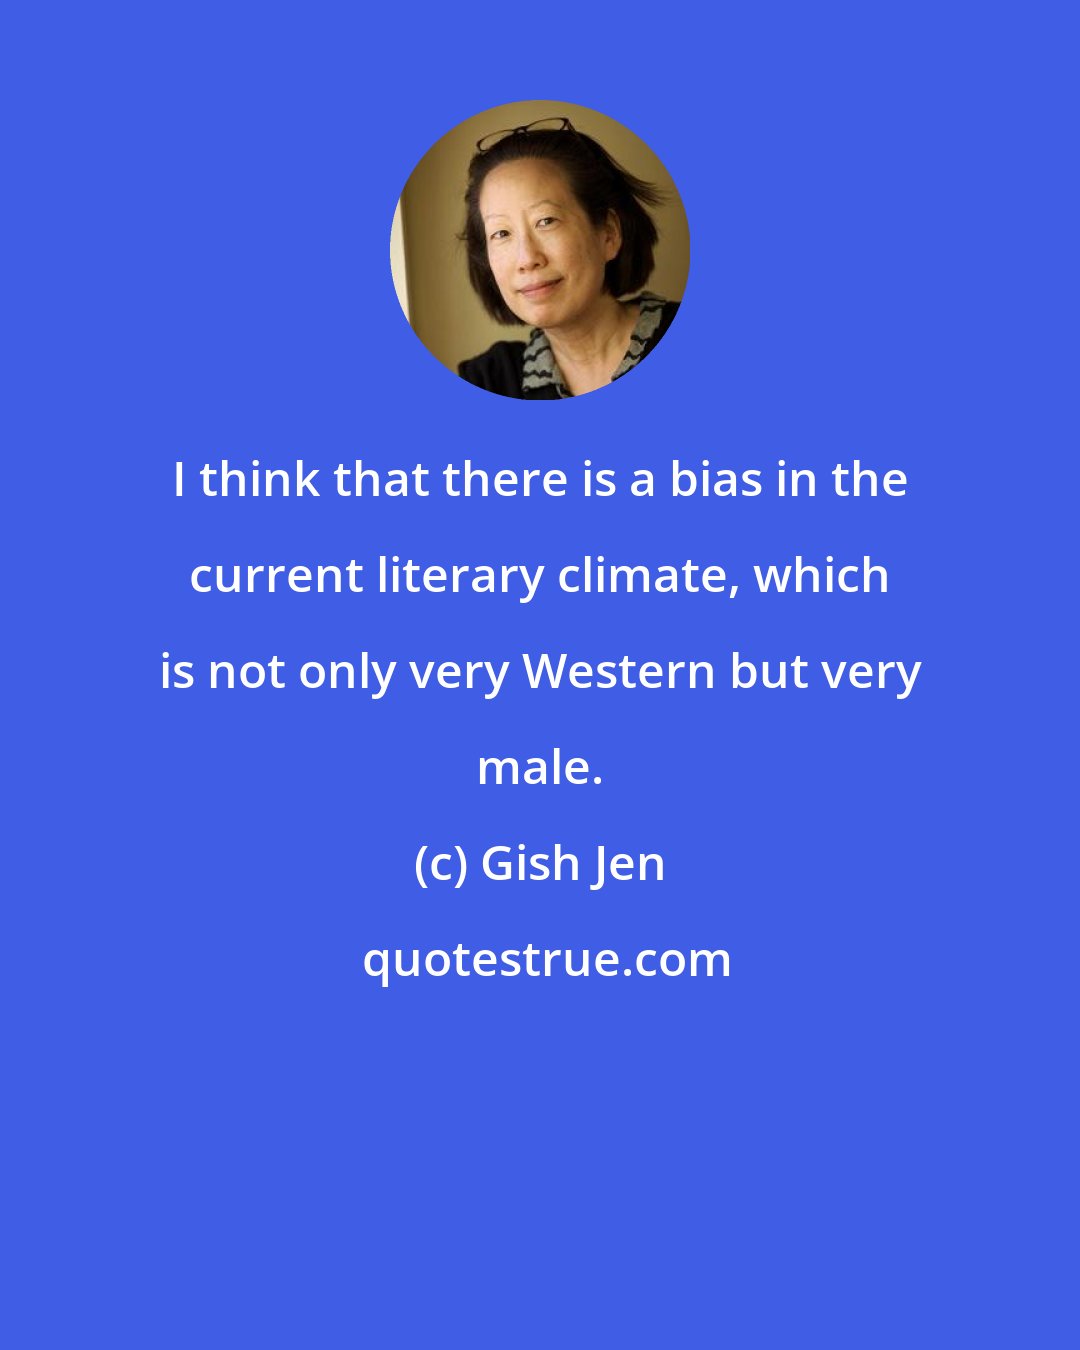 Gish Jen: I think that there is a bias in the current literary climate, which is not only very Western but very male.